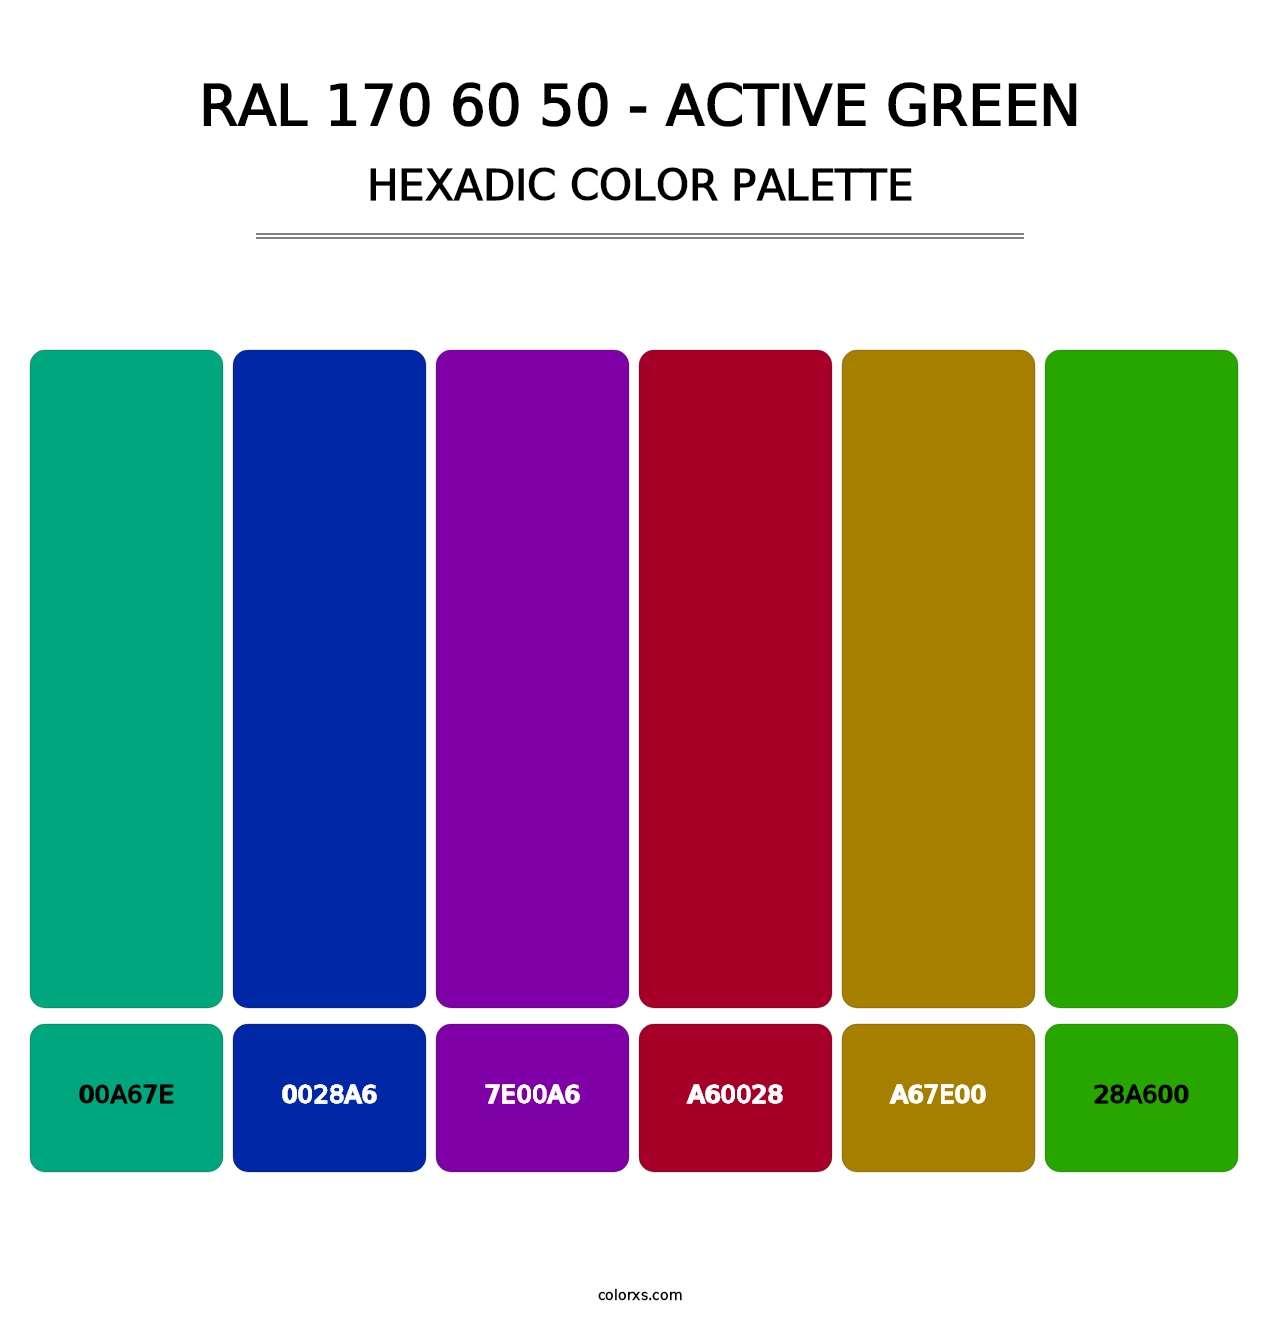 RAL 170 60 50 - Active Green - Hexadic Color Palette